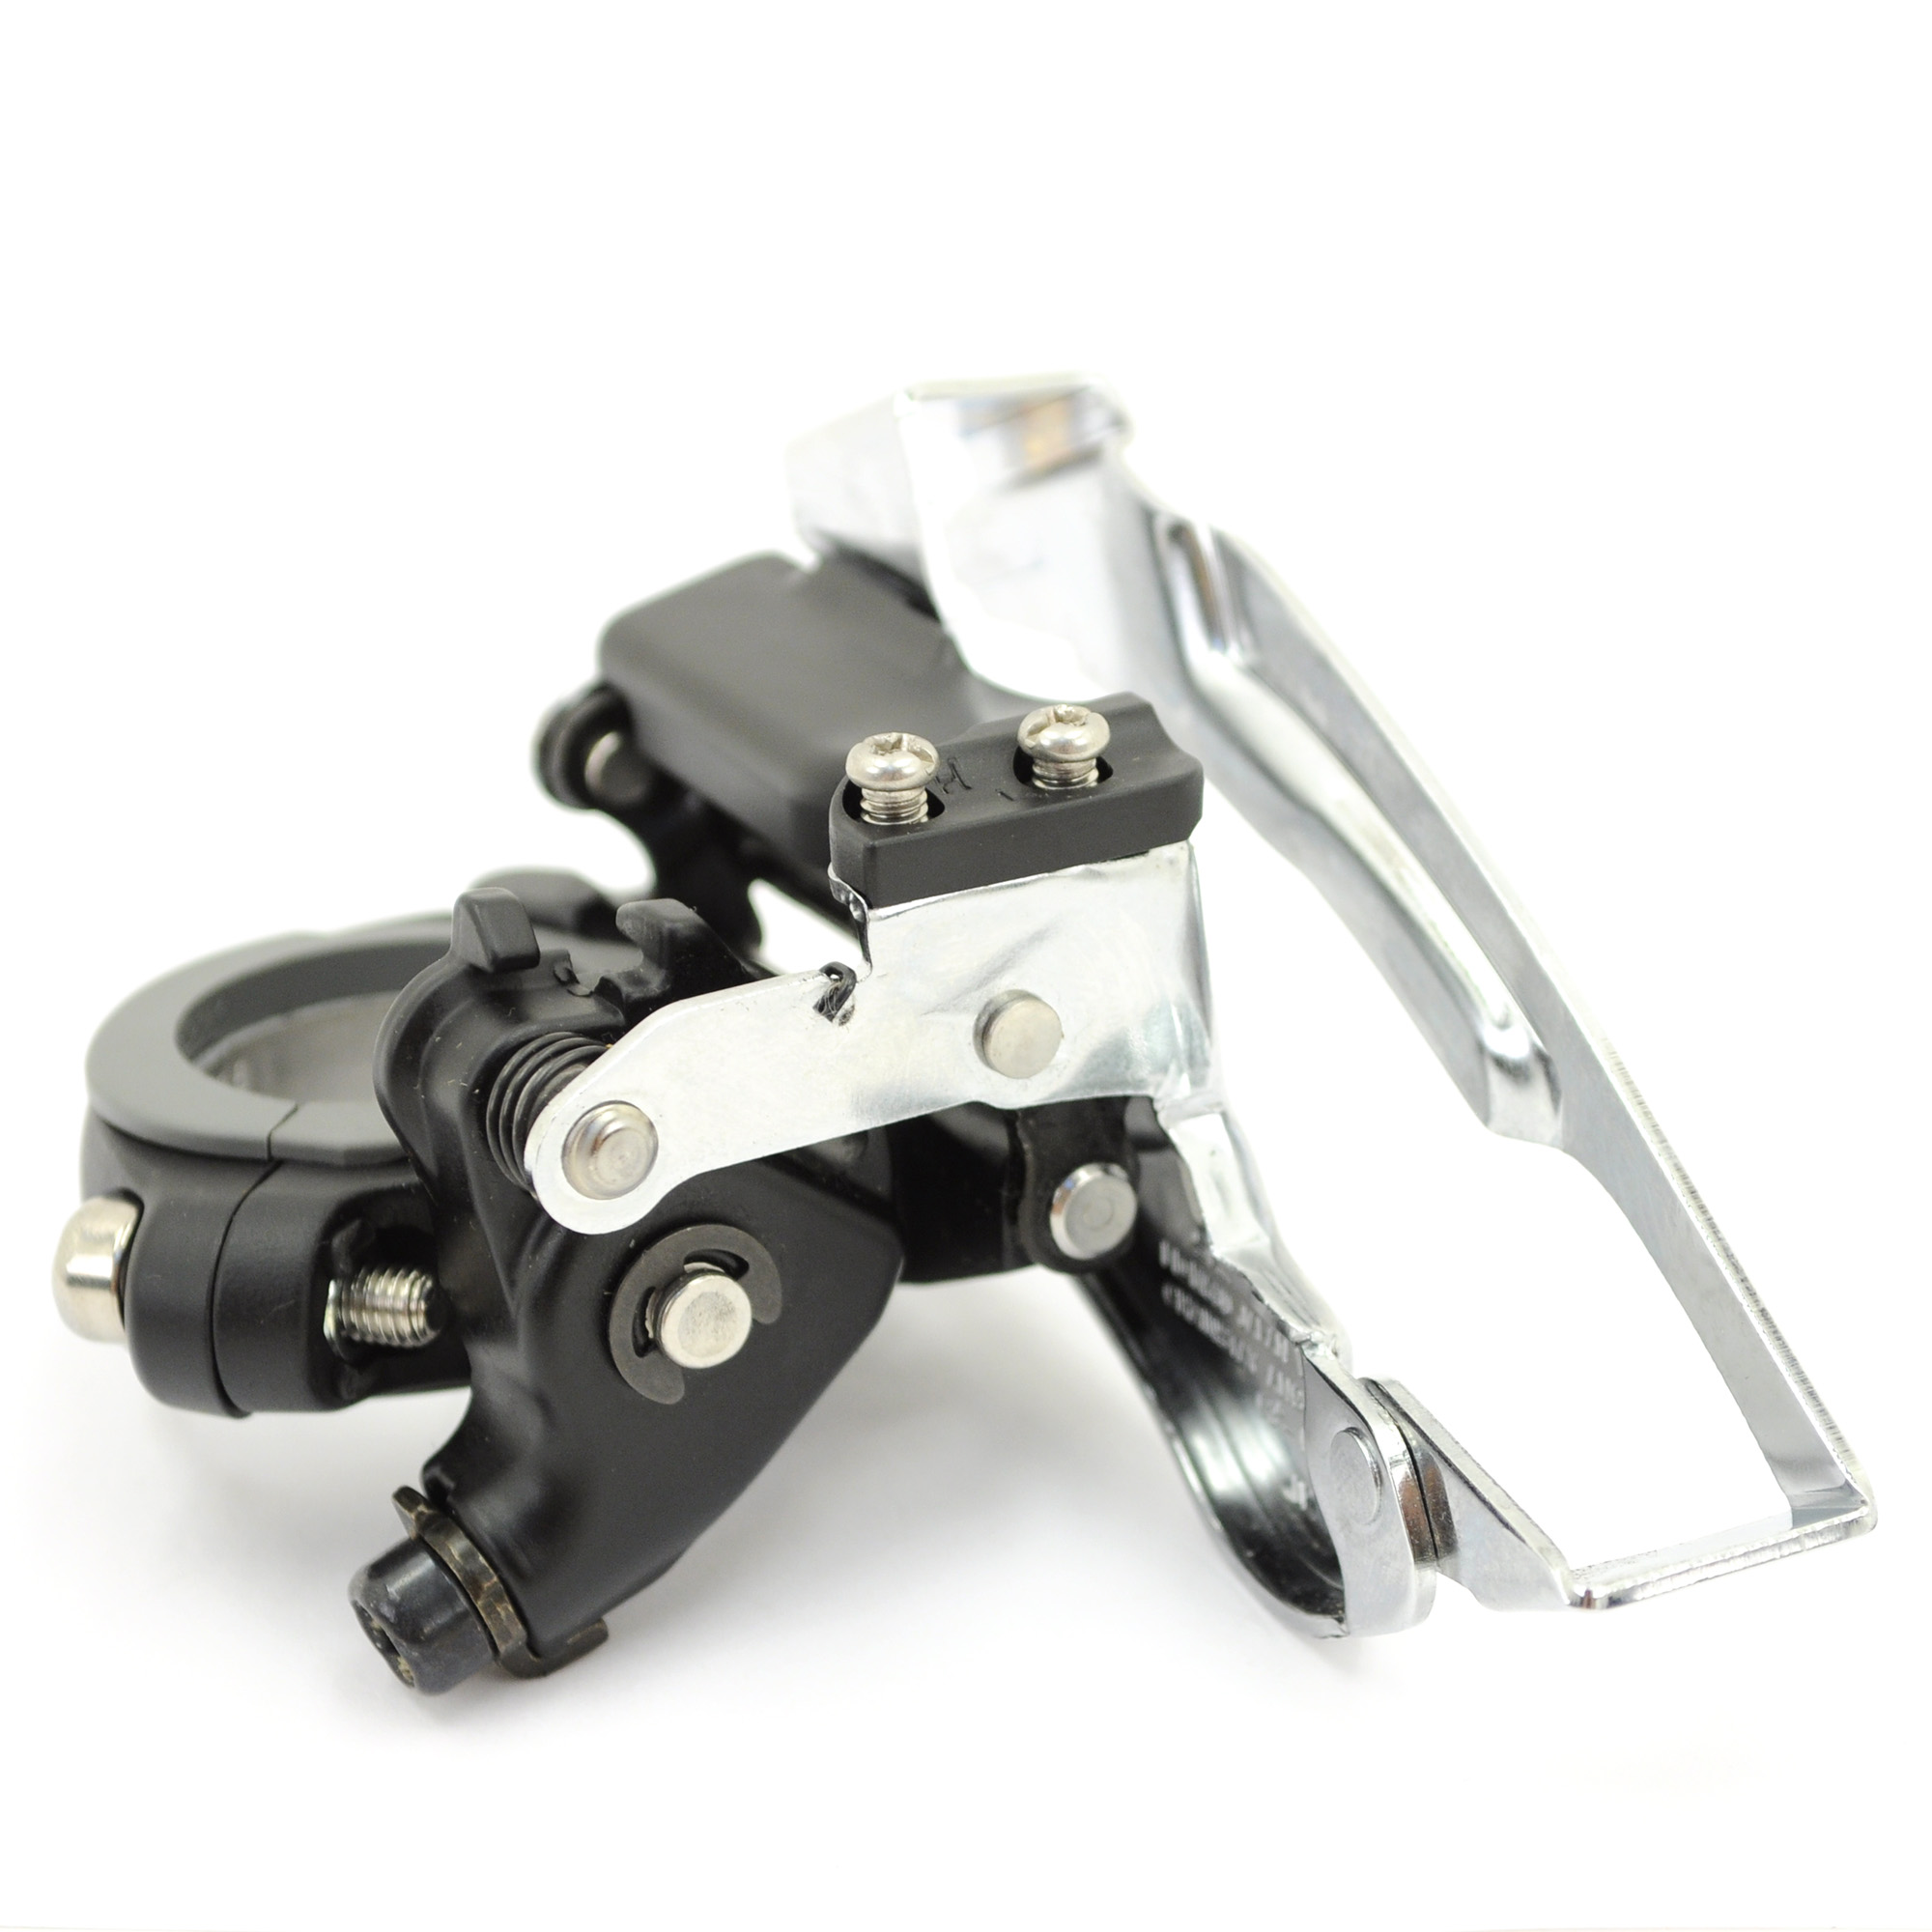 Shimano Deore FD-M530 Mountain Bike Front Derailleur // 3x9-Speed // 34.9mm - image 3 of 3